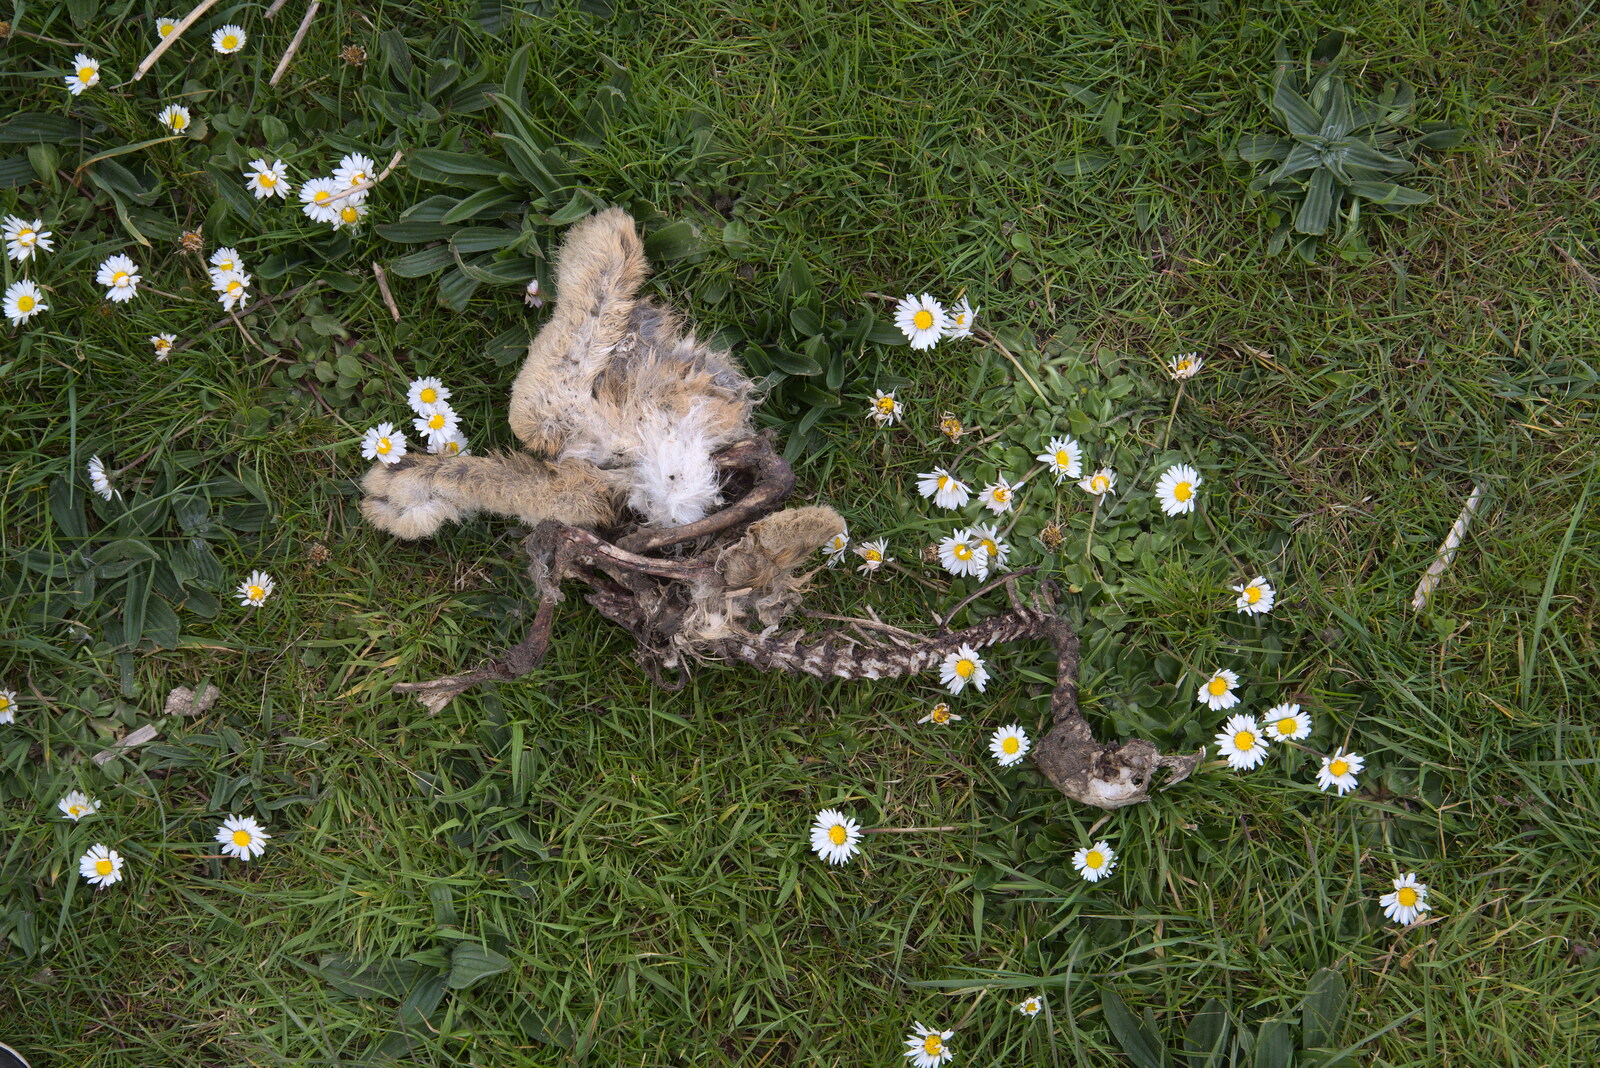 The grisly remains of a rabbit from A Return to Ickworth House, Horringer, Suffolk - 11th April 2021